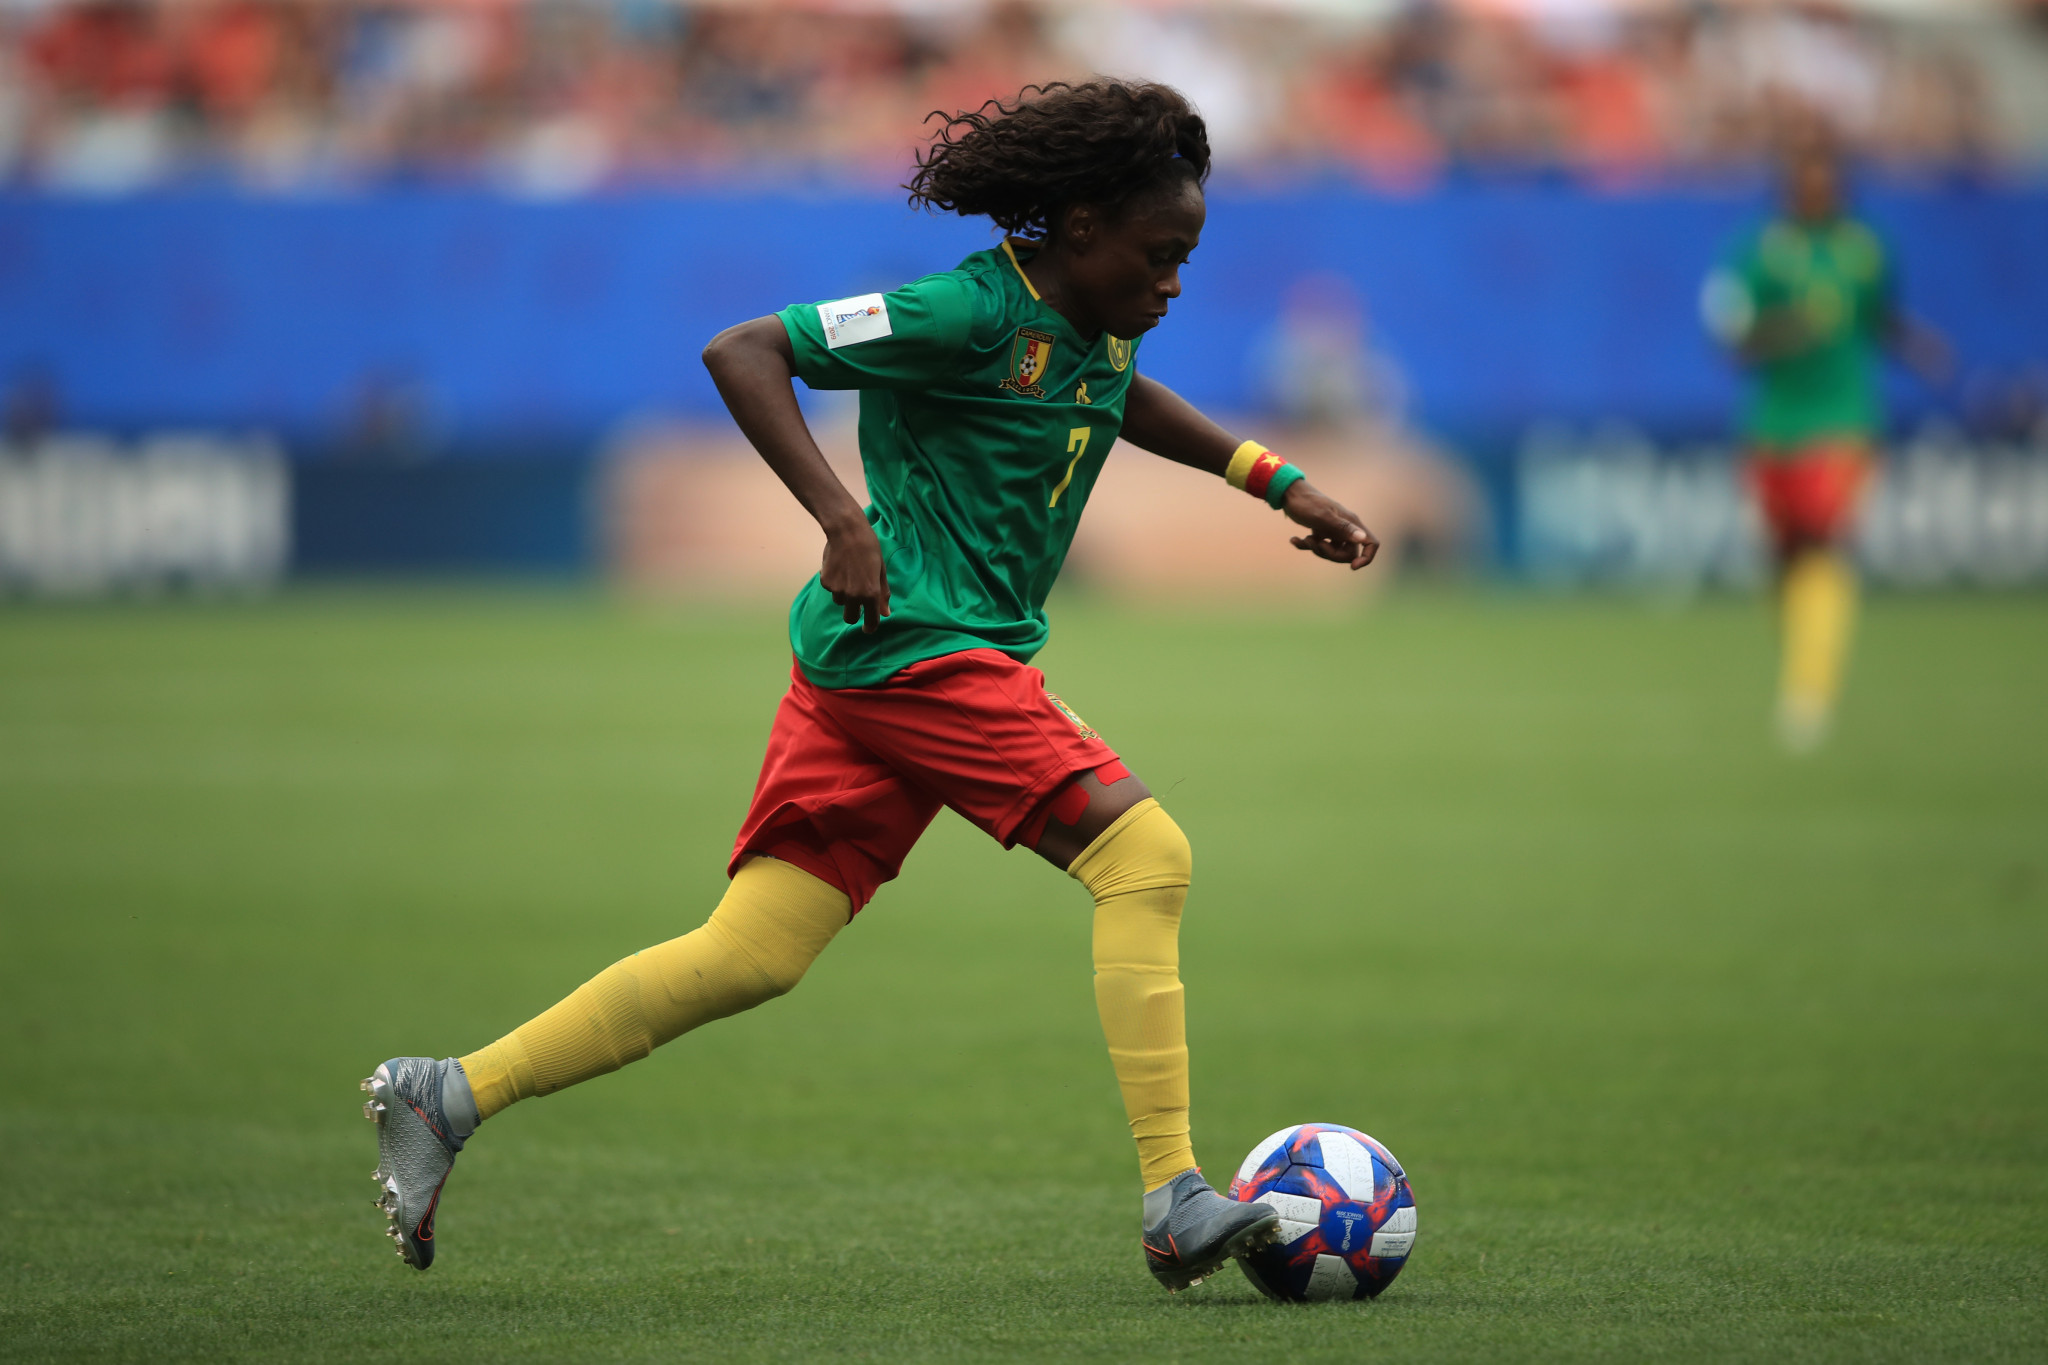 Cameroon's women's football team will be aiming to qualify for their second Olympic Games ©Getty Images